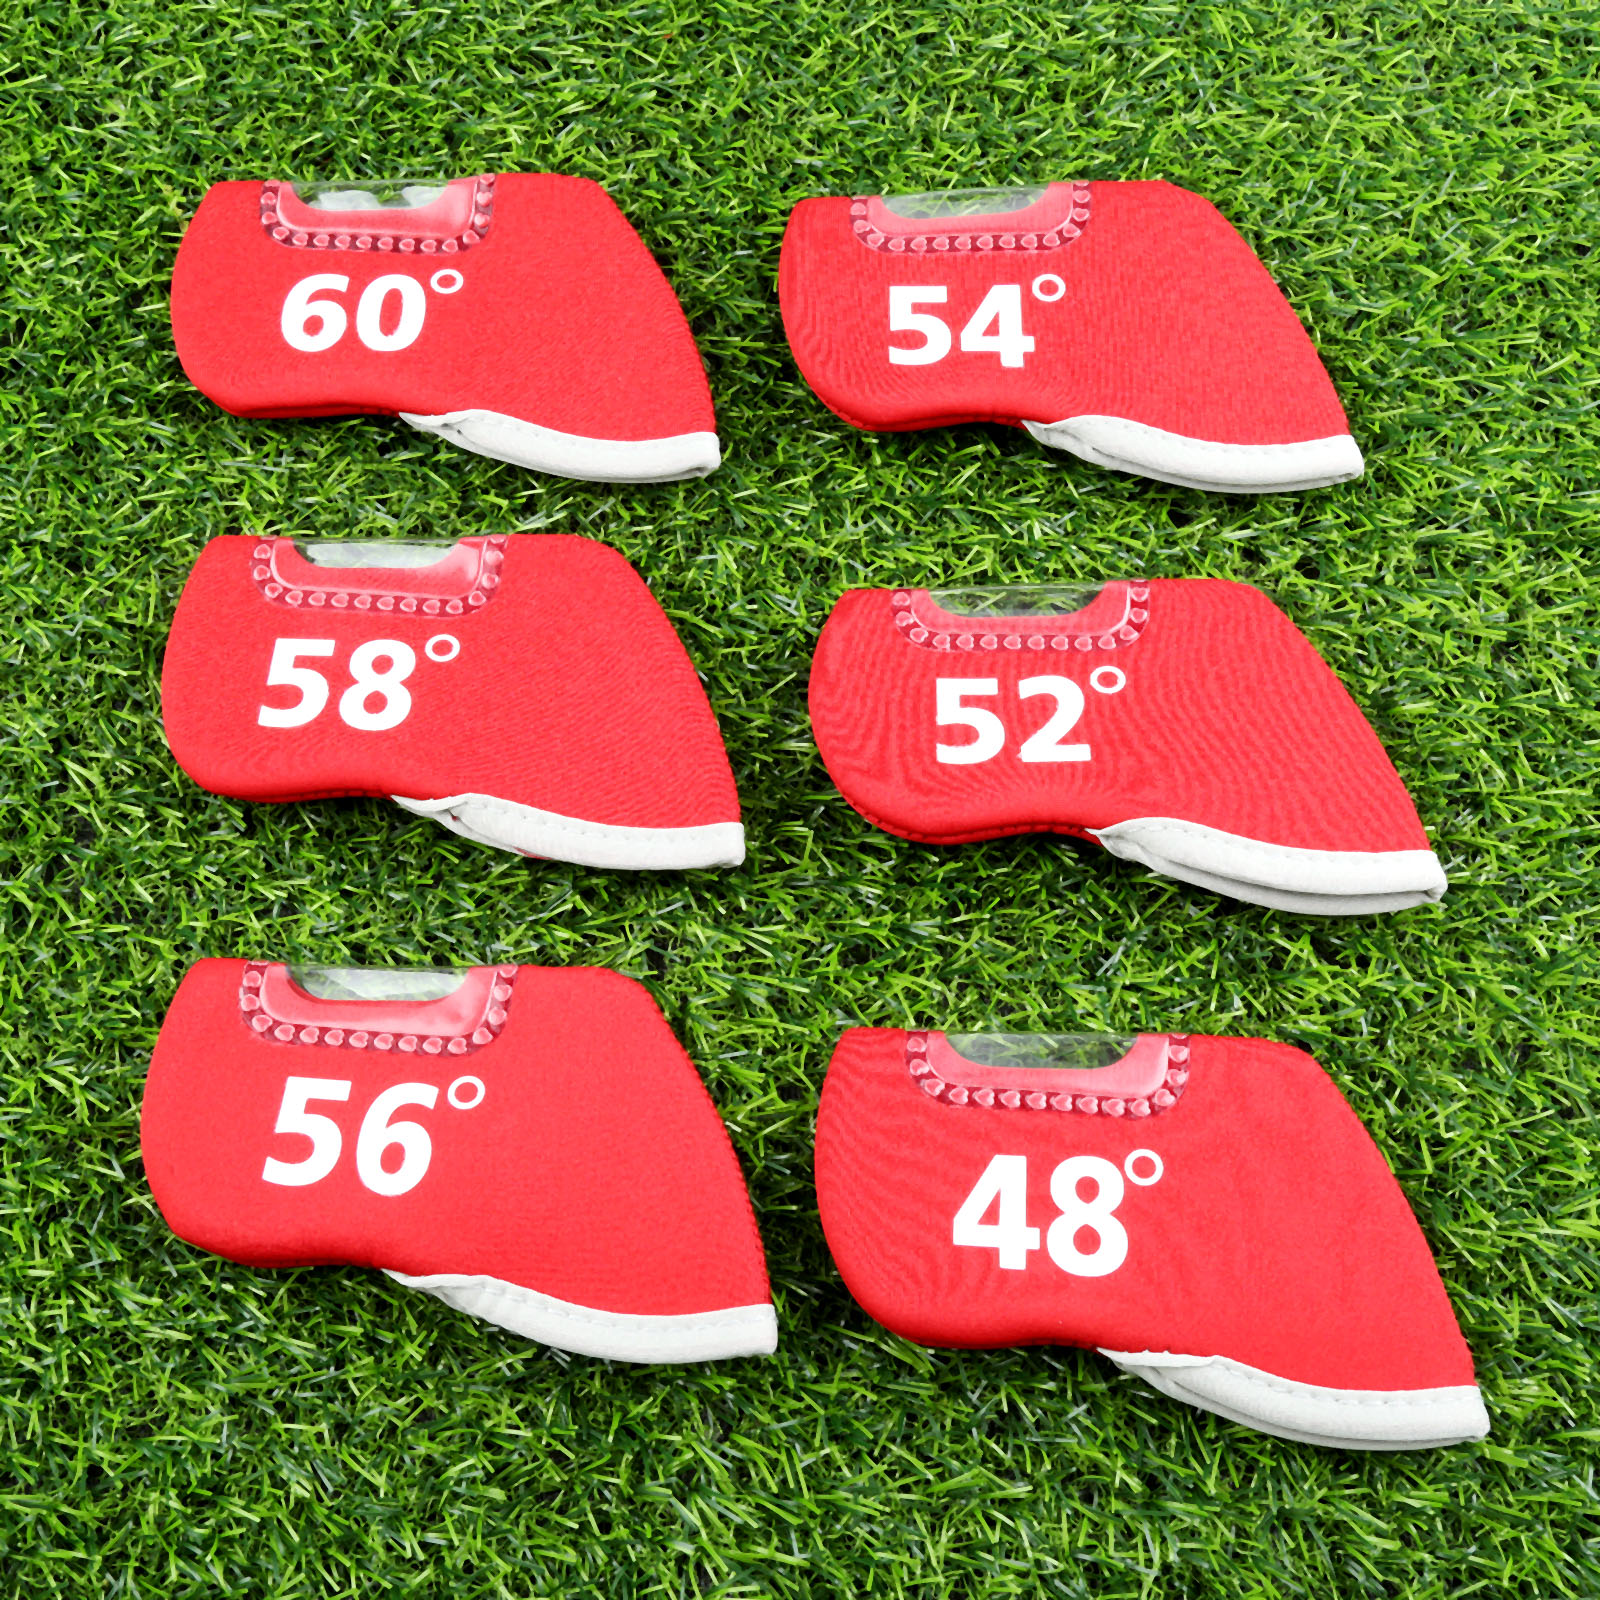 Red Golf Club Iron Head Covers Neoprene Golf Headcover Club Heads Putter Protector Set Protective Cover With Window and Numbers